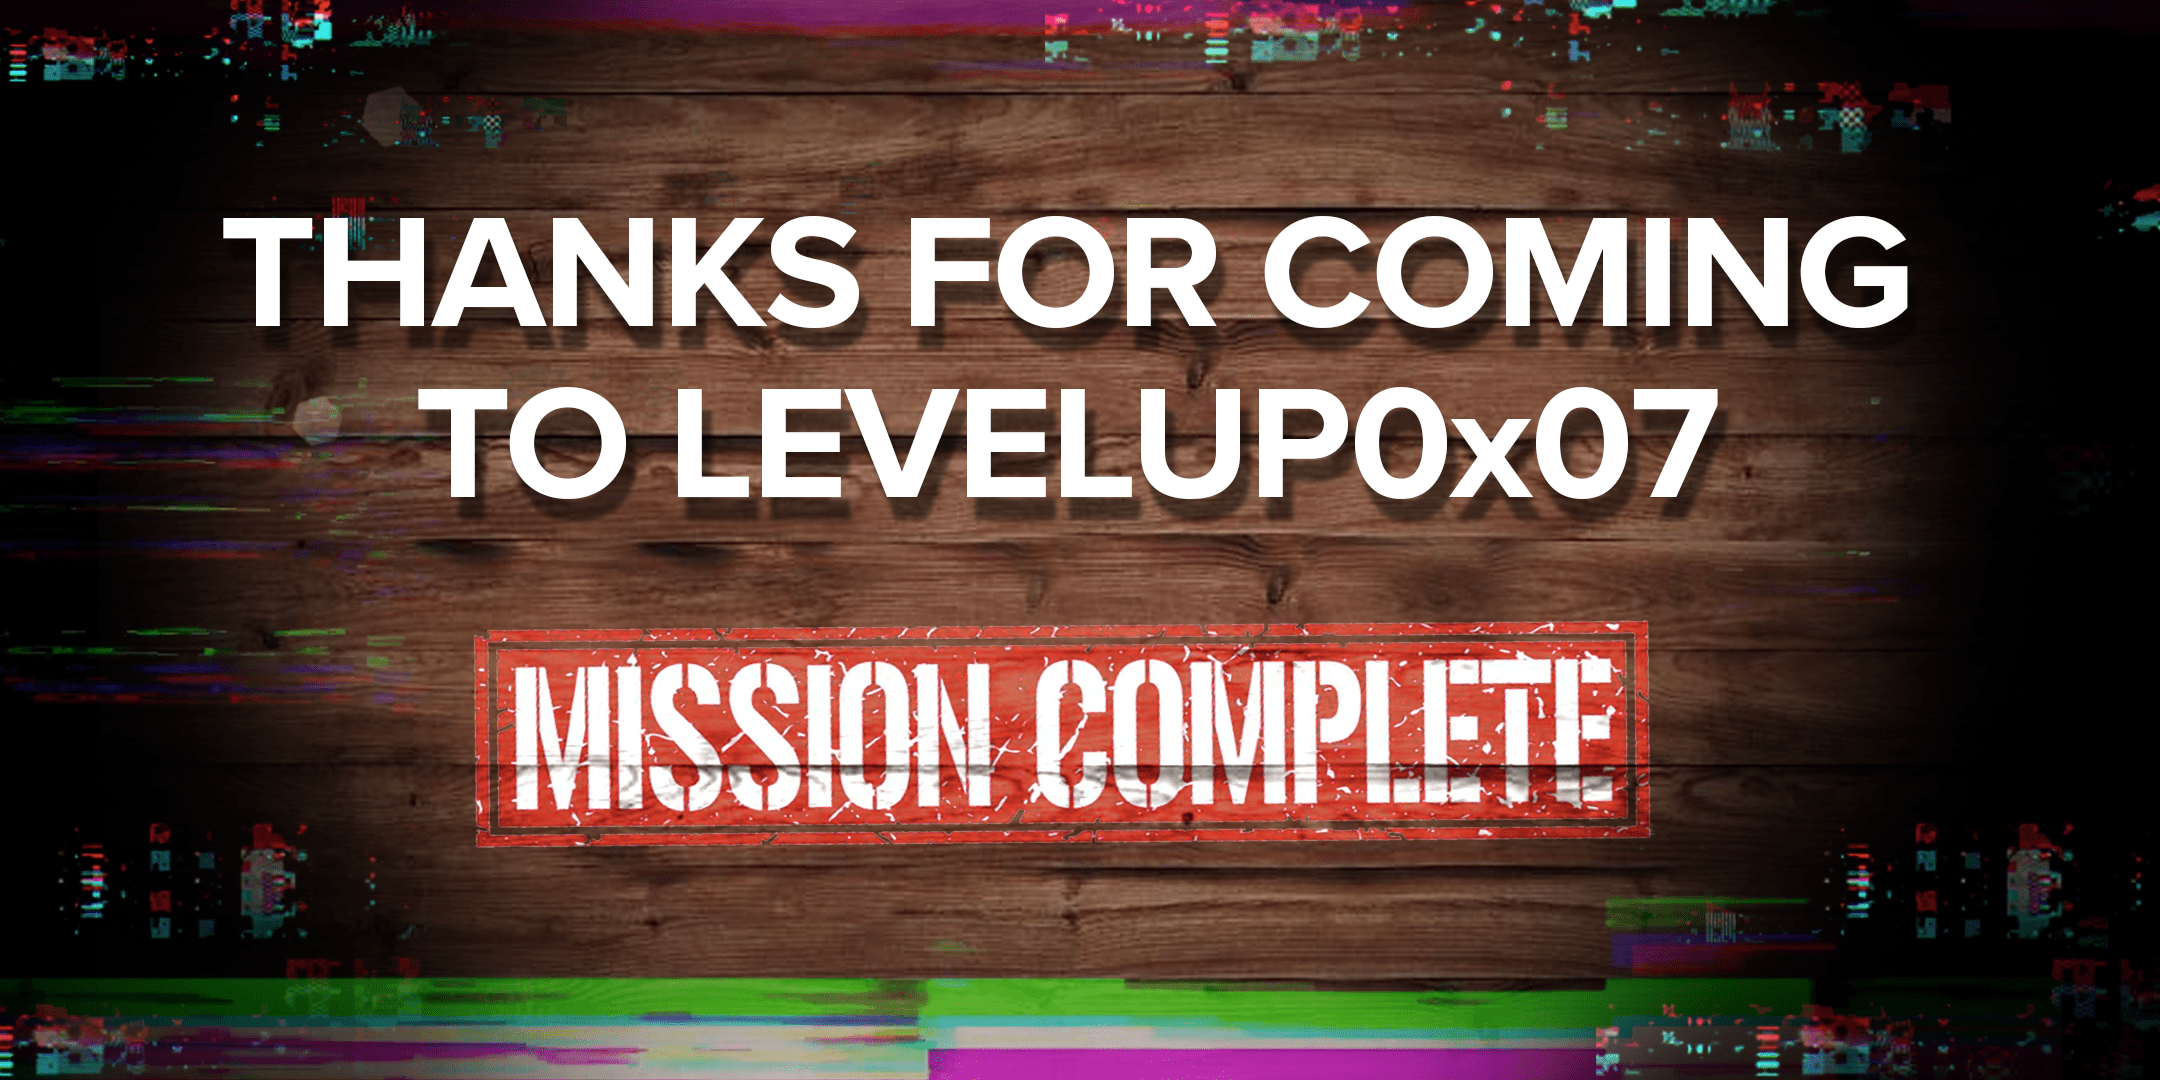 Mission Complete: LevelUp0x07!